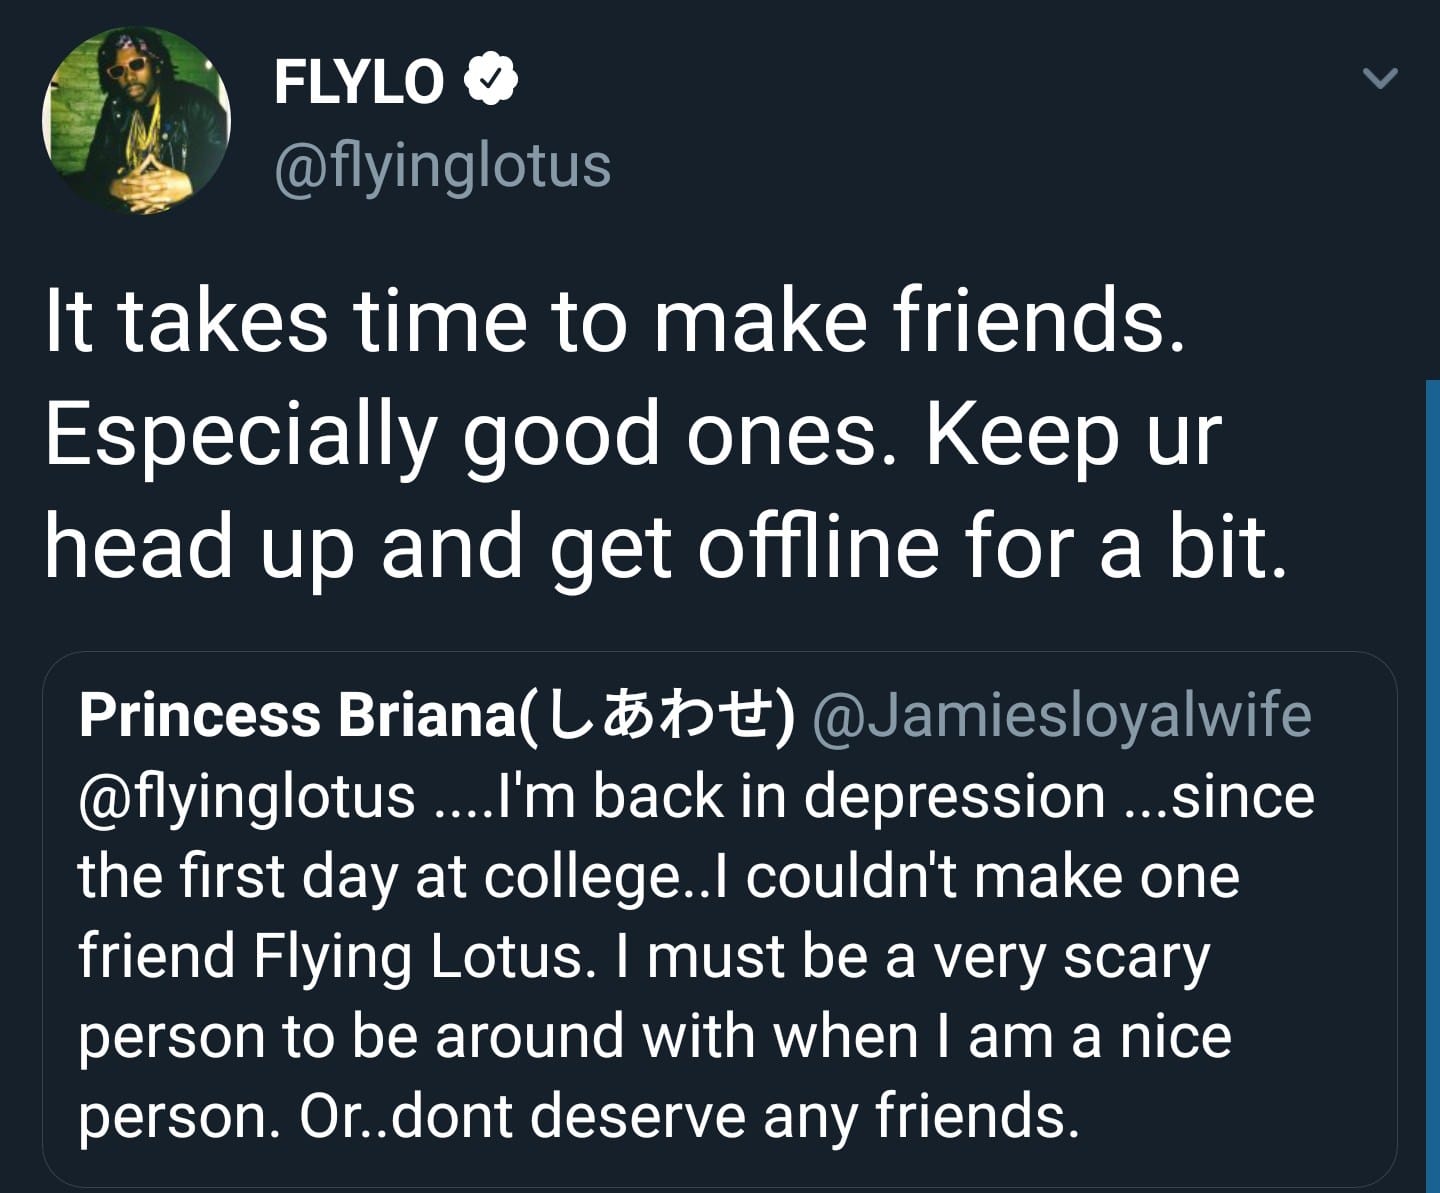 Black, Flying Lotus Wholesome Memes Black, Flying Lotus text: FLYLO e @flyinglotus It takes time to make friends. Especially good ones. Keep ur head up and get offline for a bit. Princess Briana( l.-Æt)€) @JamiesloyaIwife @flyinglotus ....l'm back in depression ...since the first day at college..l couldn't make one friend Flying Lotus. I must be a very scary person to be around with when I am a nice person. Or..dont deserve any friends. 